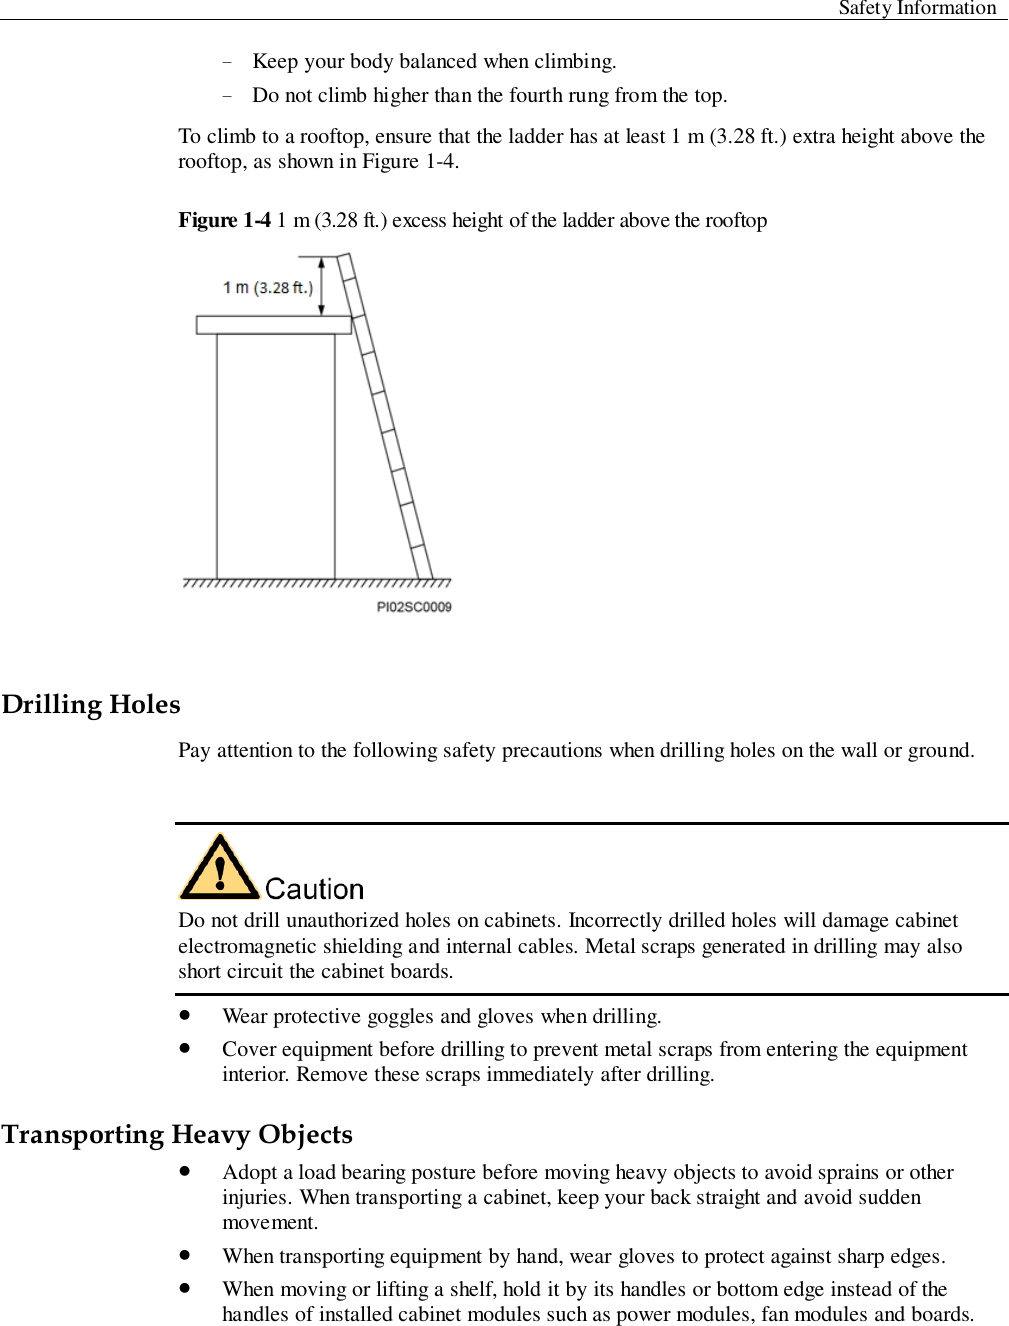  Safety Information  − Keep your body balanced when climbing.   − Do not climb higher than the fourth rung from the top.   To climb to a rooftop, ensure that the ladder has at least 1 m (3.28 ft.) extra height above the rooftop, as shown in Figure 1-4.   Figure 1-4 1 m (3.28 ft.) excess height of the ladder above the rooftop   Drilling Holes Pay attention to the following safety precautions when drilling holes on the wall or ground.     Do not drill unauthorized holes on cabinets. Incorrectly drilled holes will damage cabinet electromagnetic shielding and internal cables. Metal scraps generated in drilling may also short circuit the cabinet boards.    Wear protective goggles and gloves when drilling.    Cover equipment before drilling to prevent metal scraps from entering the equipment interior. Remove these scraps immediately after drilling.   Transporting Heavy Objects    Adopt a load bearing posture before moving heavy objects to avoid sprains or other injuries. When transporting a cabinet, keep your back straight and avoid sudden movement.    When transporting equipment by hand, wear gloves to protect against sharp edges.    When moving or lifting a shelf, hold it by its handles or bottom edge instead of the handles of installed cabinet modules such as power modules, fan modules and boards. 